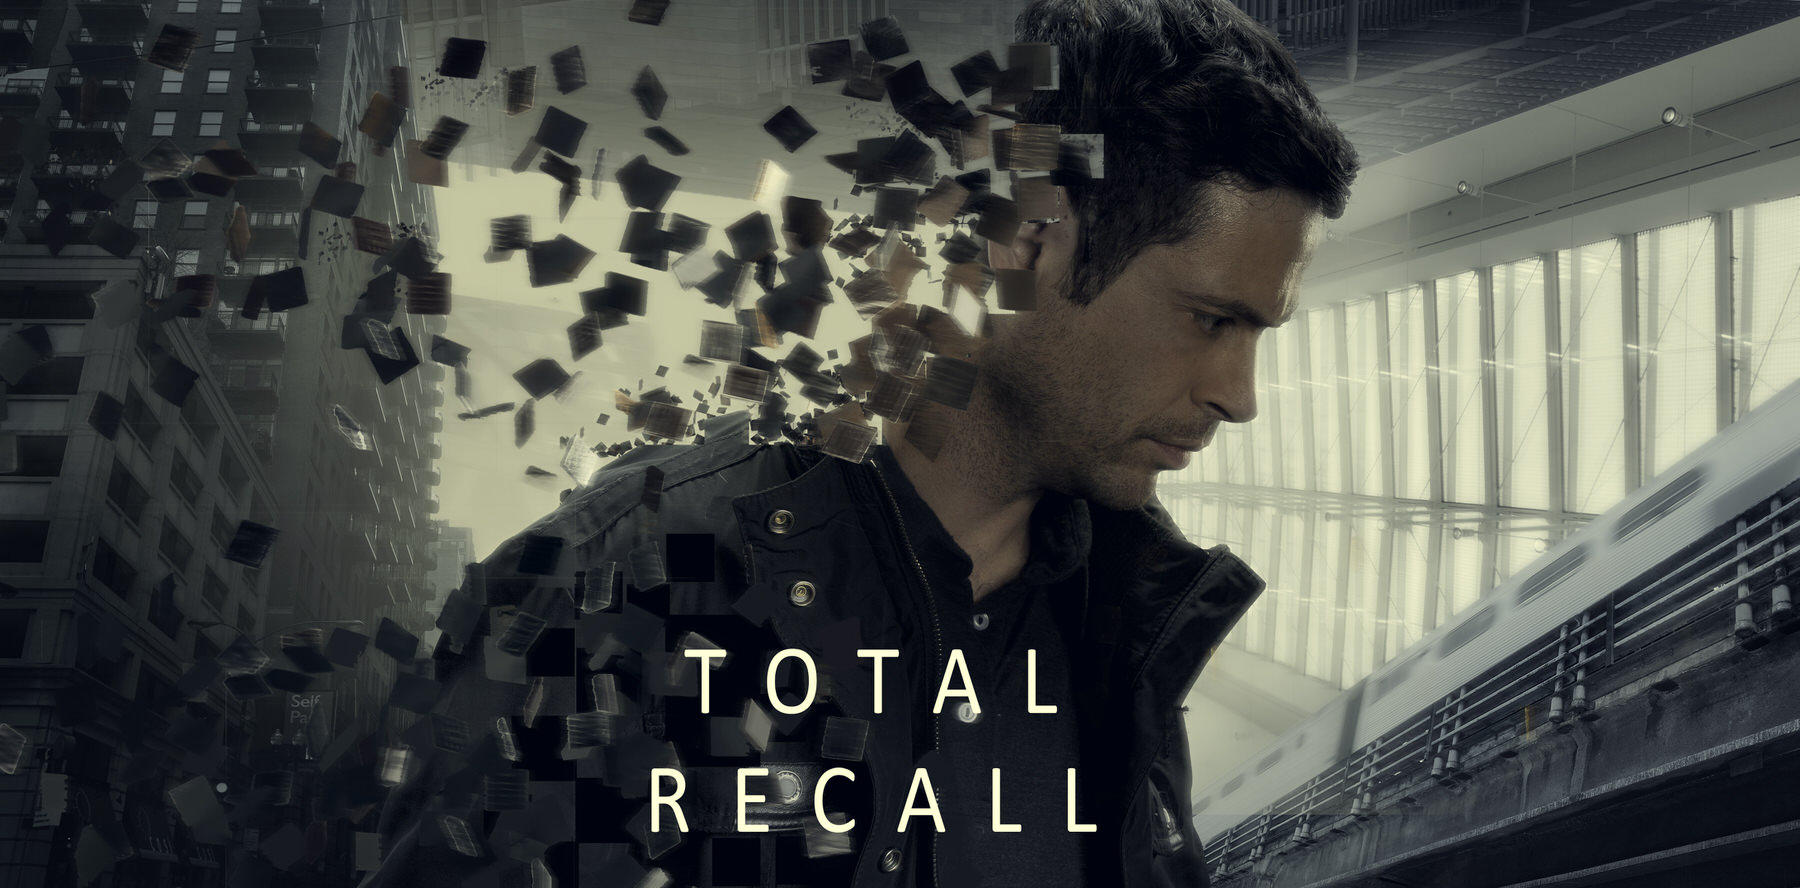 http://phlearn.com/wp-content/uploads/2012/07/Total-Recall.jpg